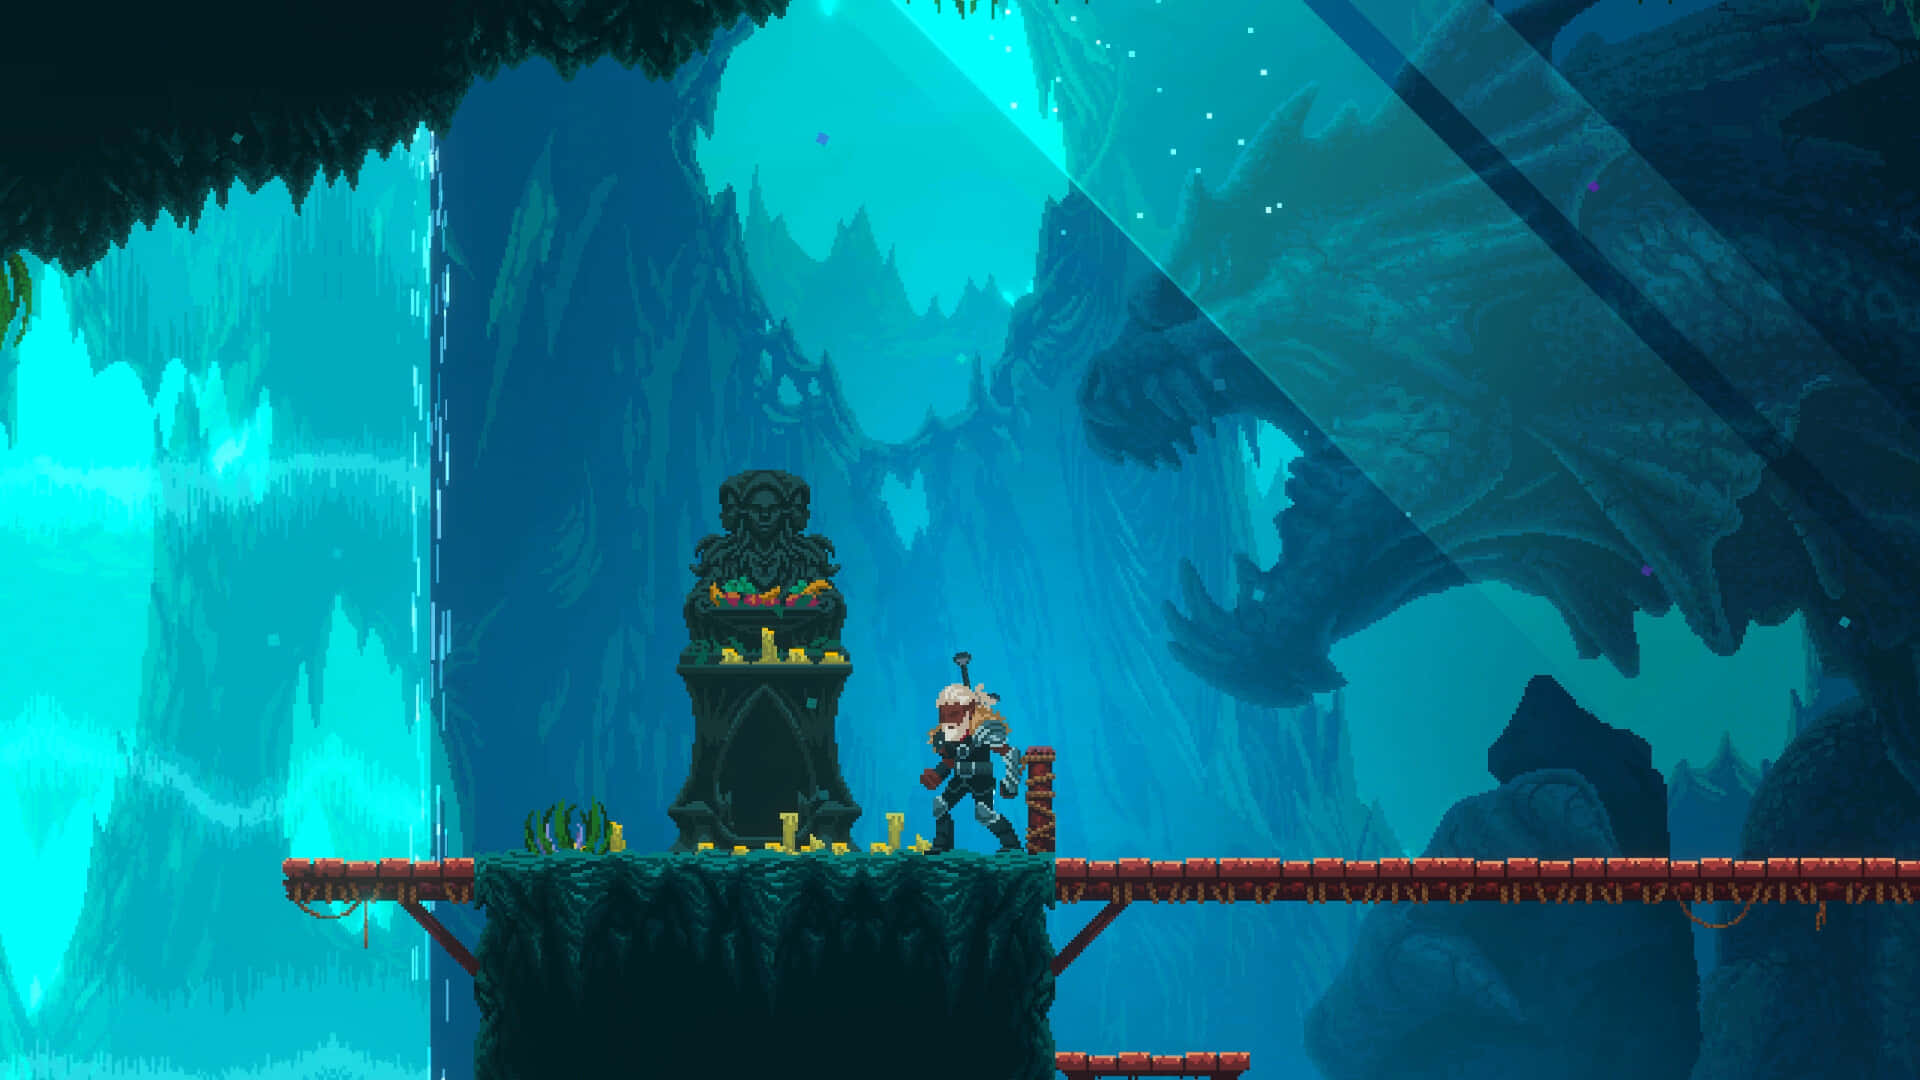 A Game With A Man Standing On A Bridge In A Cave